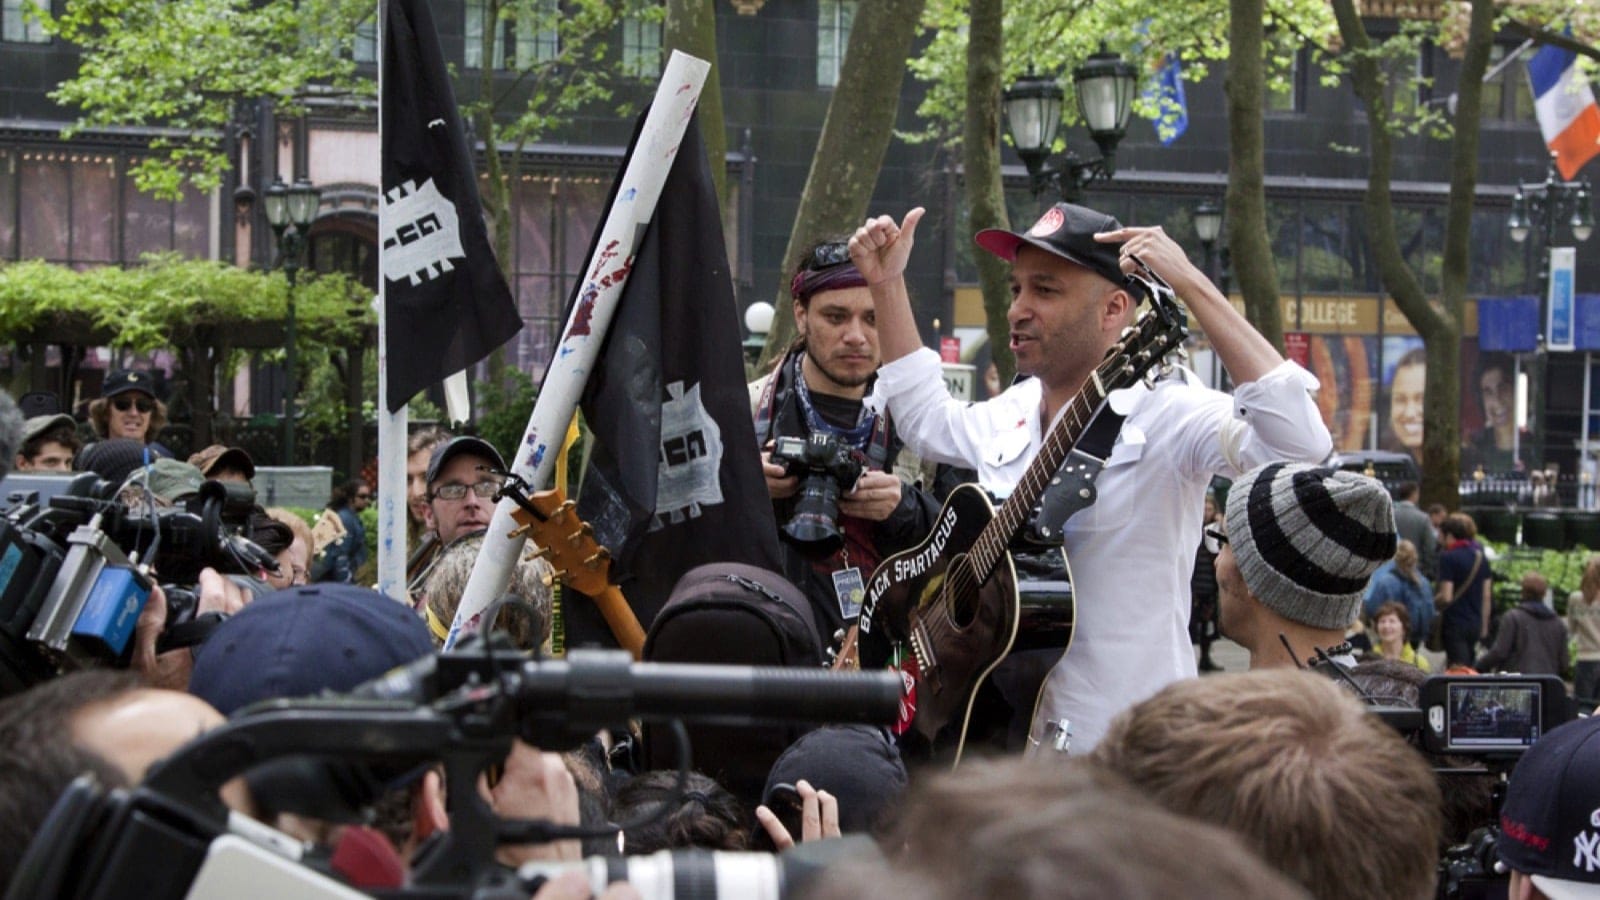 NEW YORK - MAY 1: Rage Against The Machine guitarist Tom Morello speaks to the Occupy Guitarmy group during May Day protests in Bryant Park on May 1, 2012 in New York, NY.